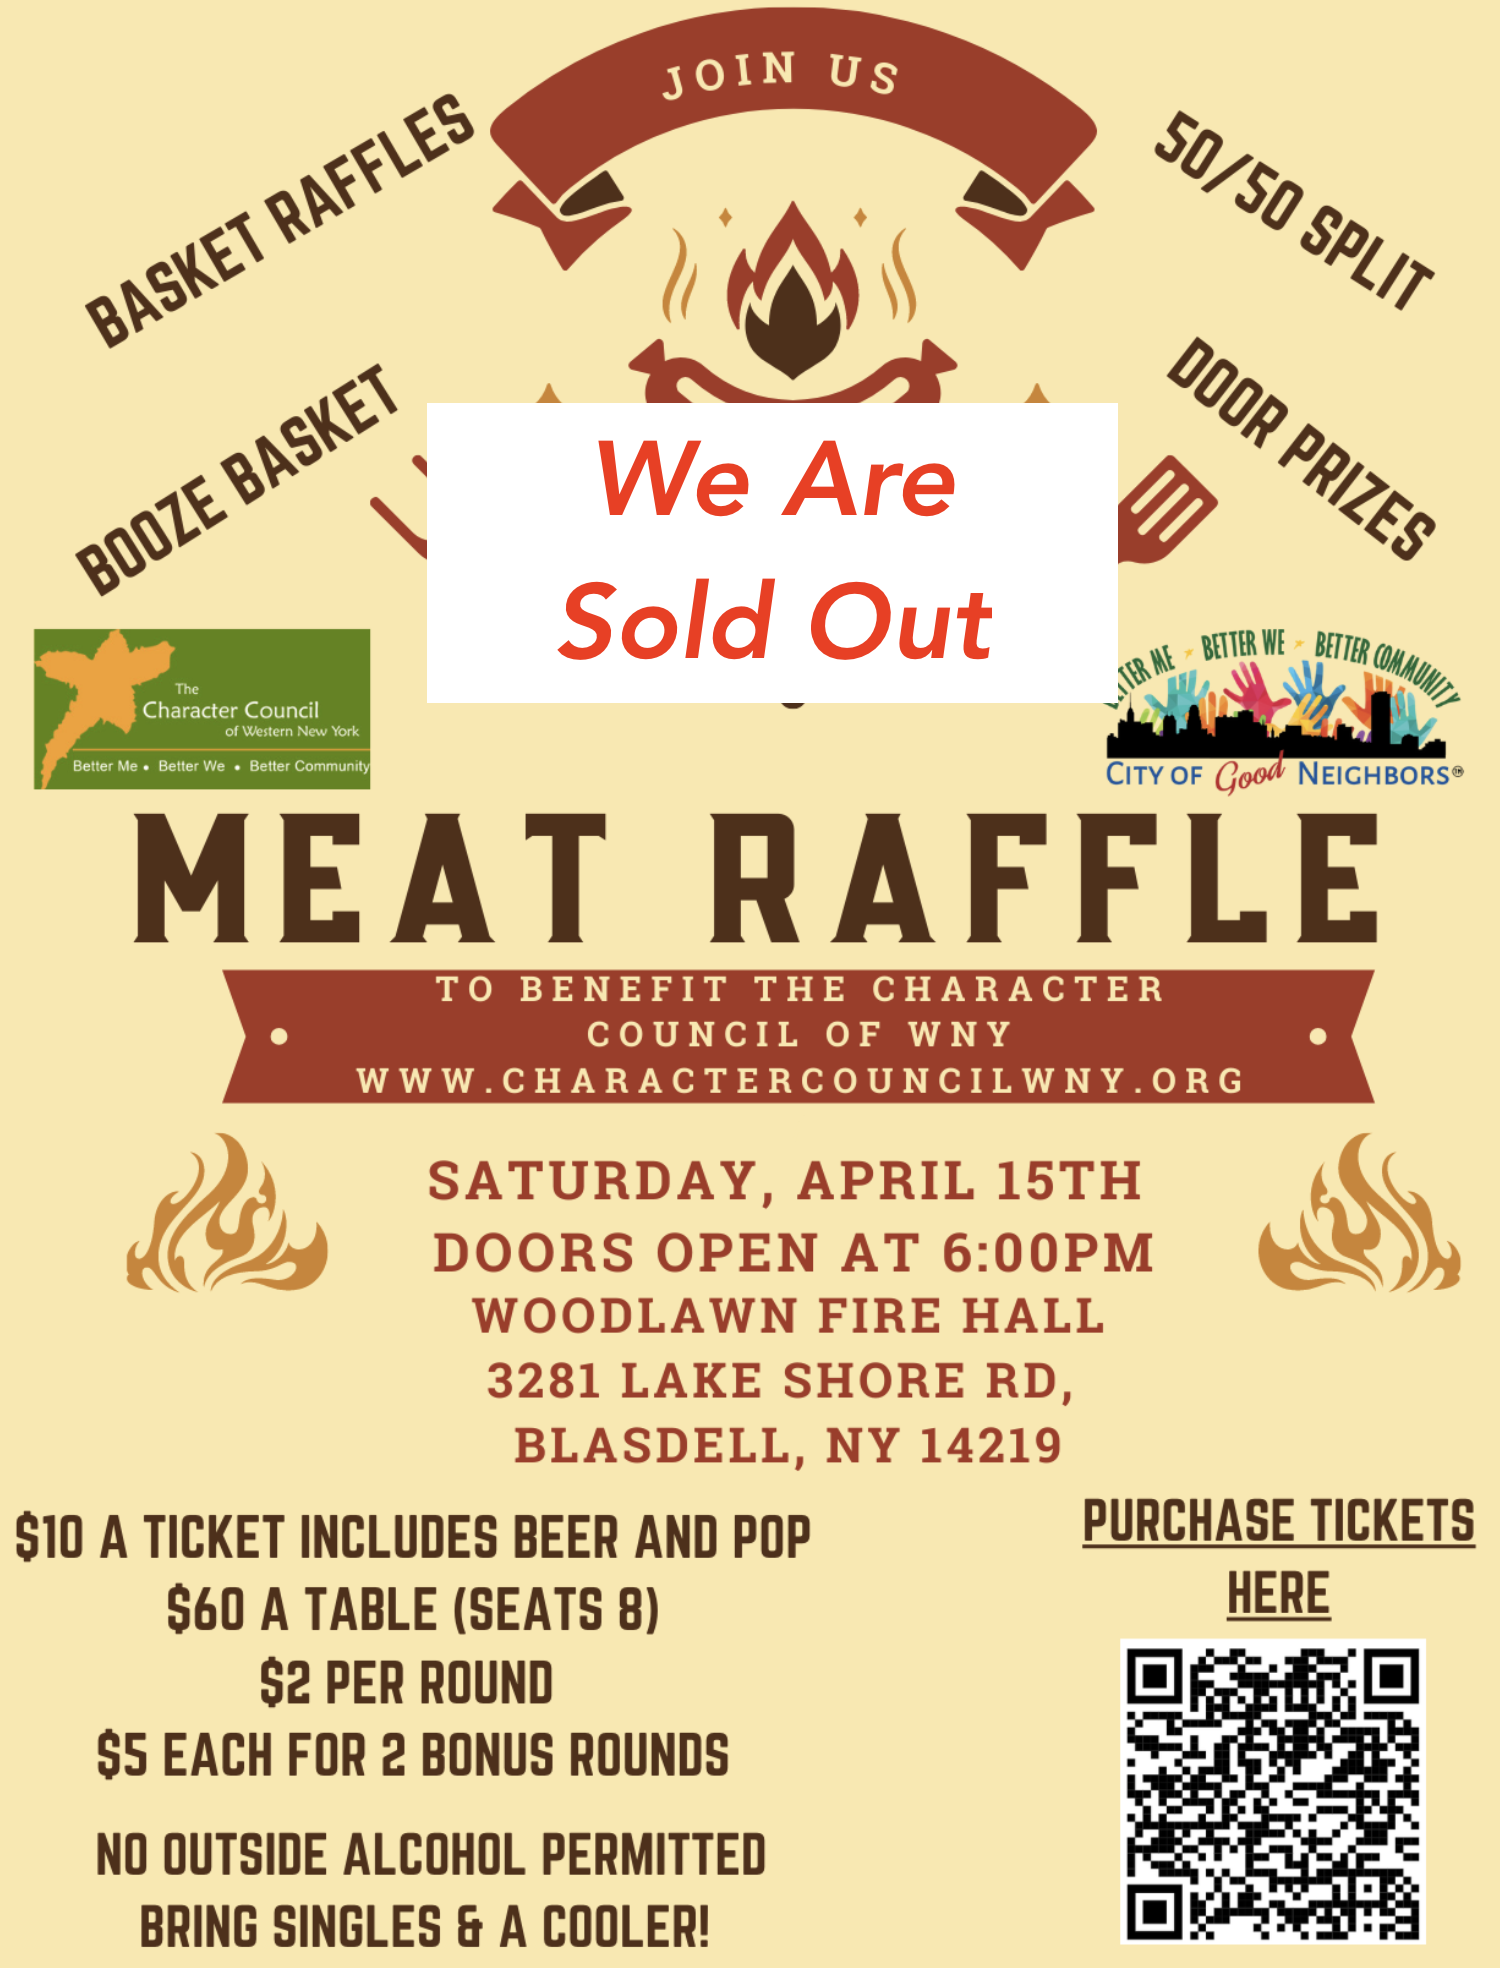 Meat Raffle Flyer sold out